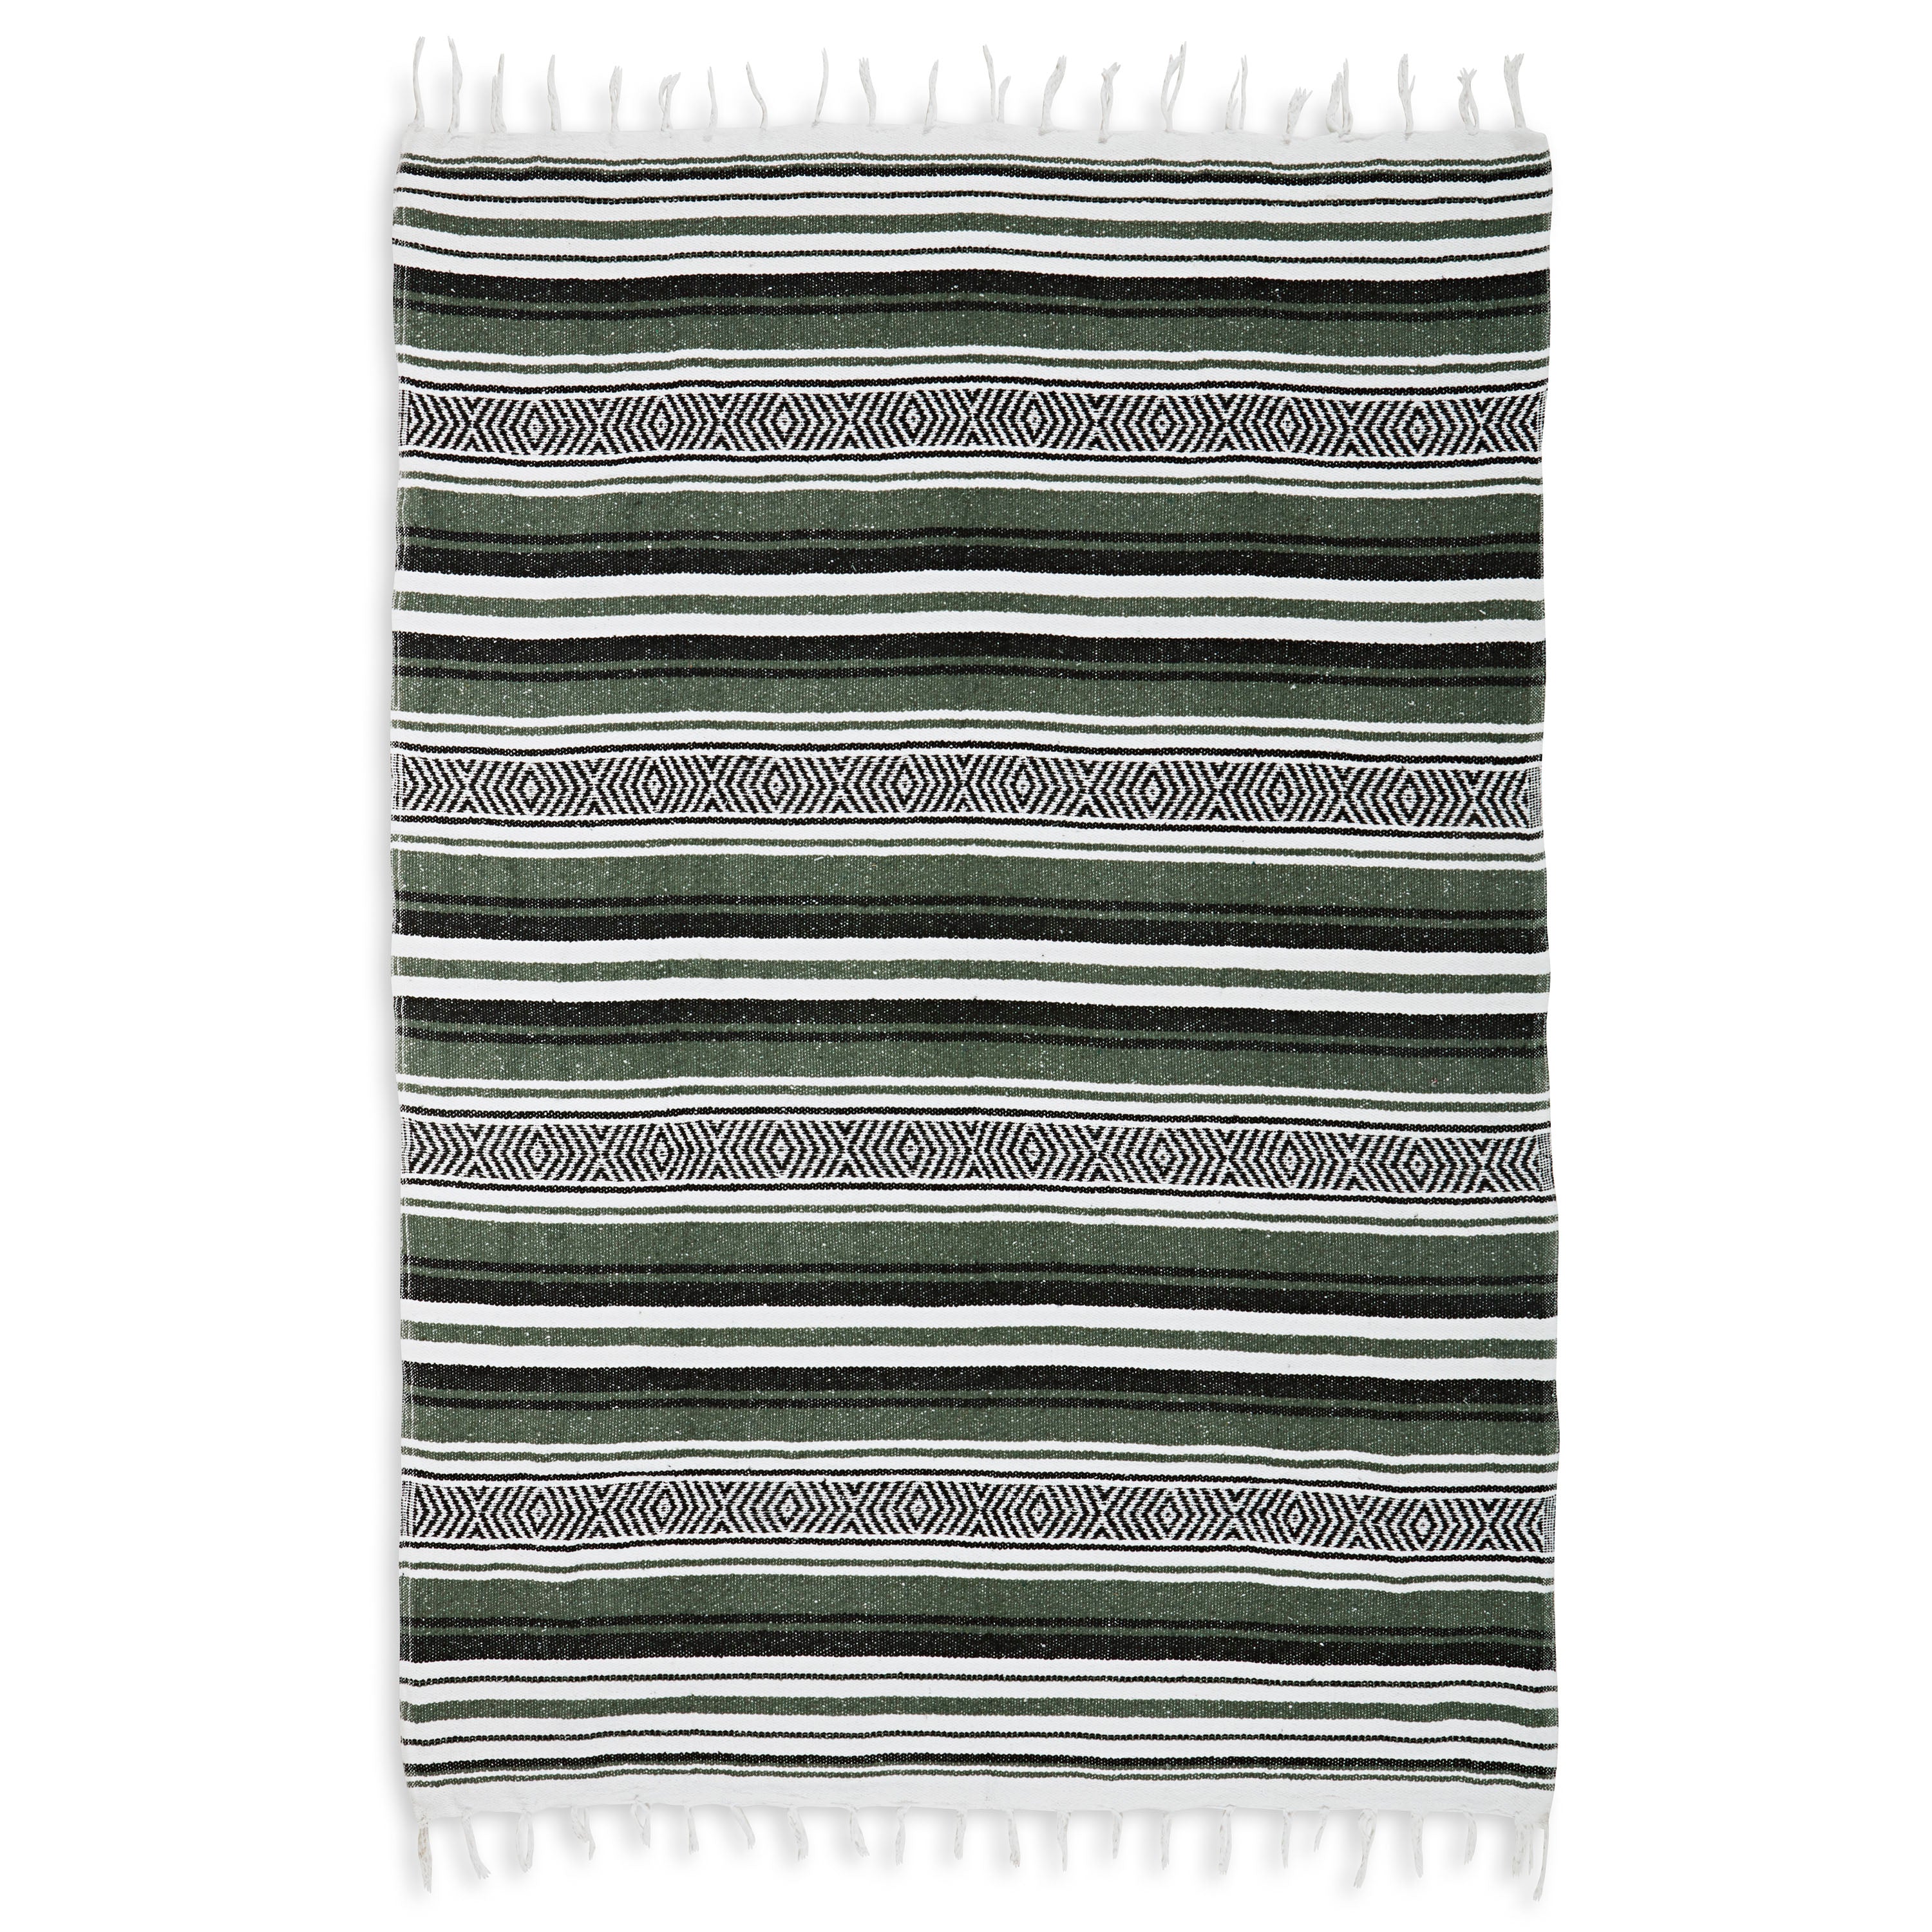 Traditional Mexican Woven Blanket Olive/White/Black flat